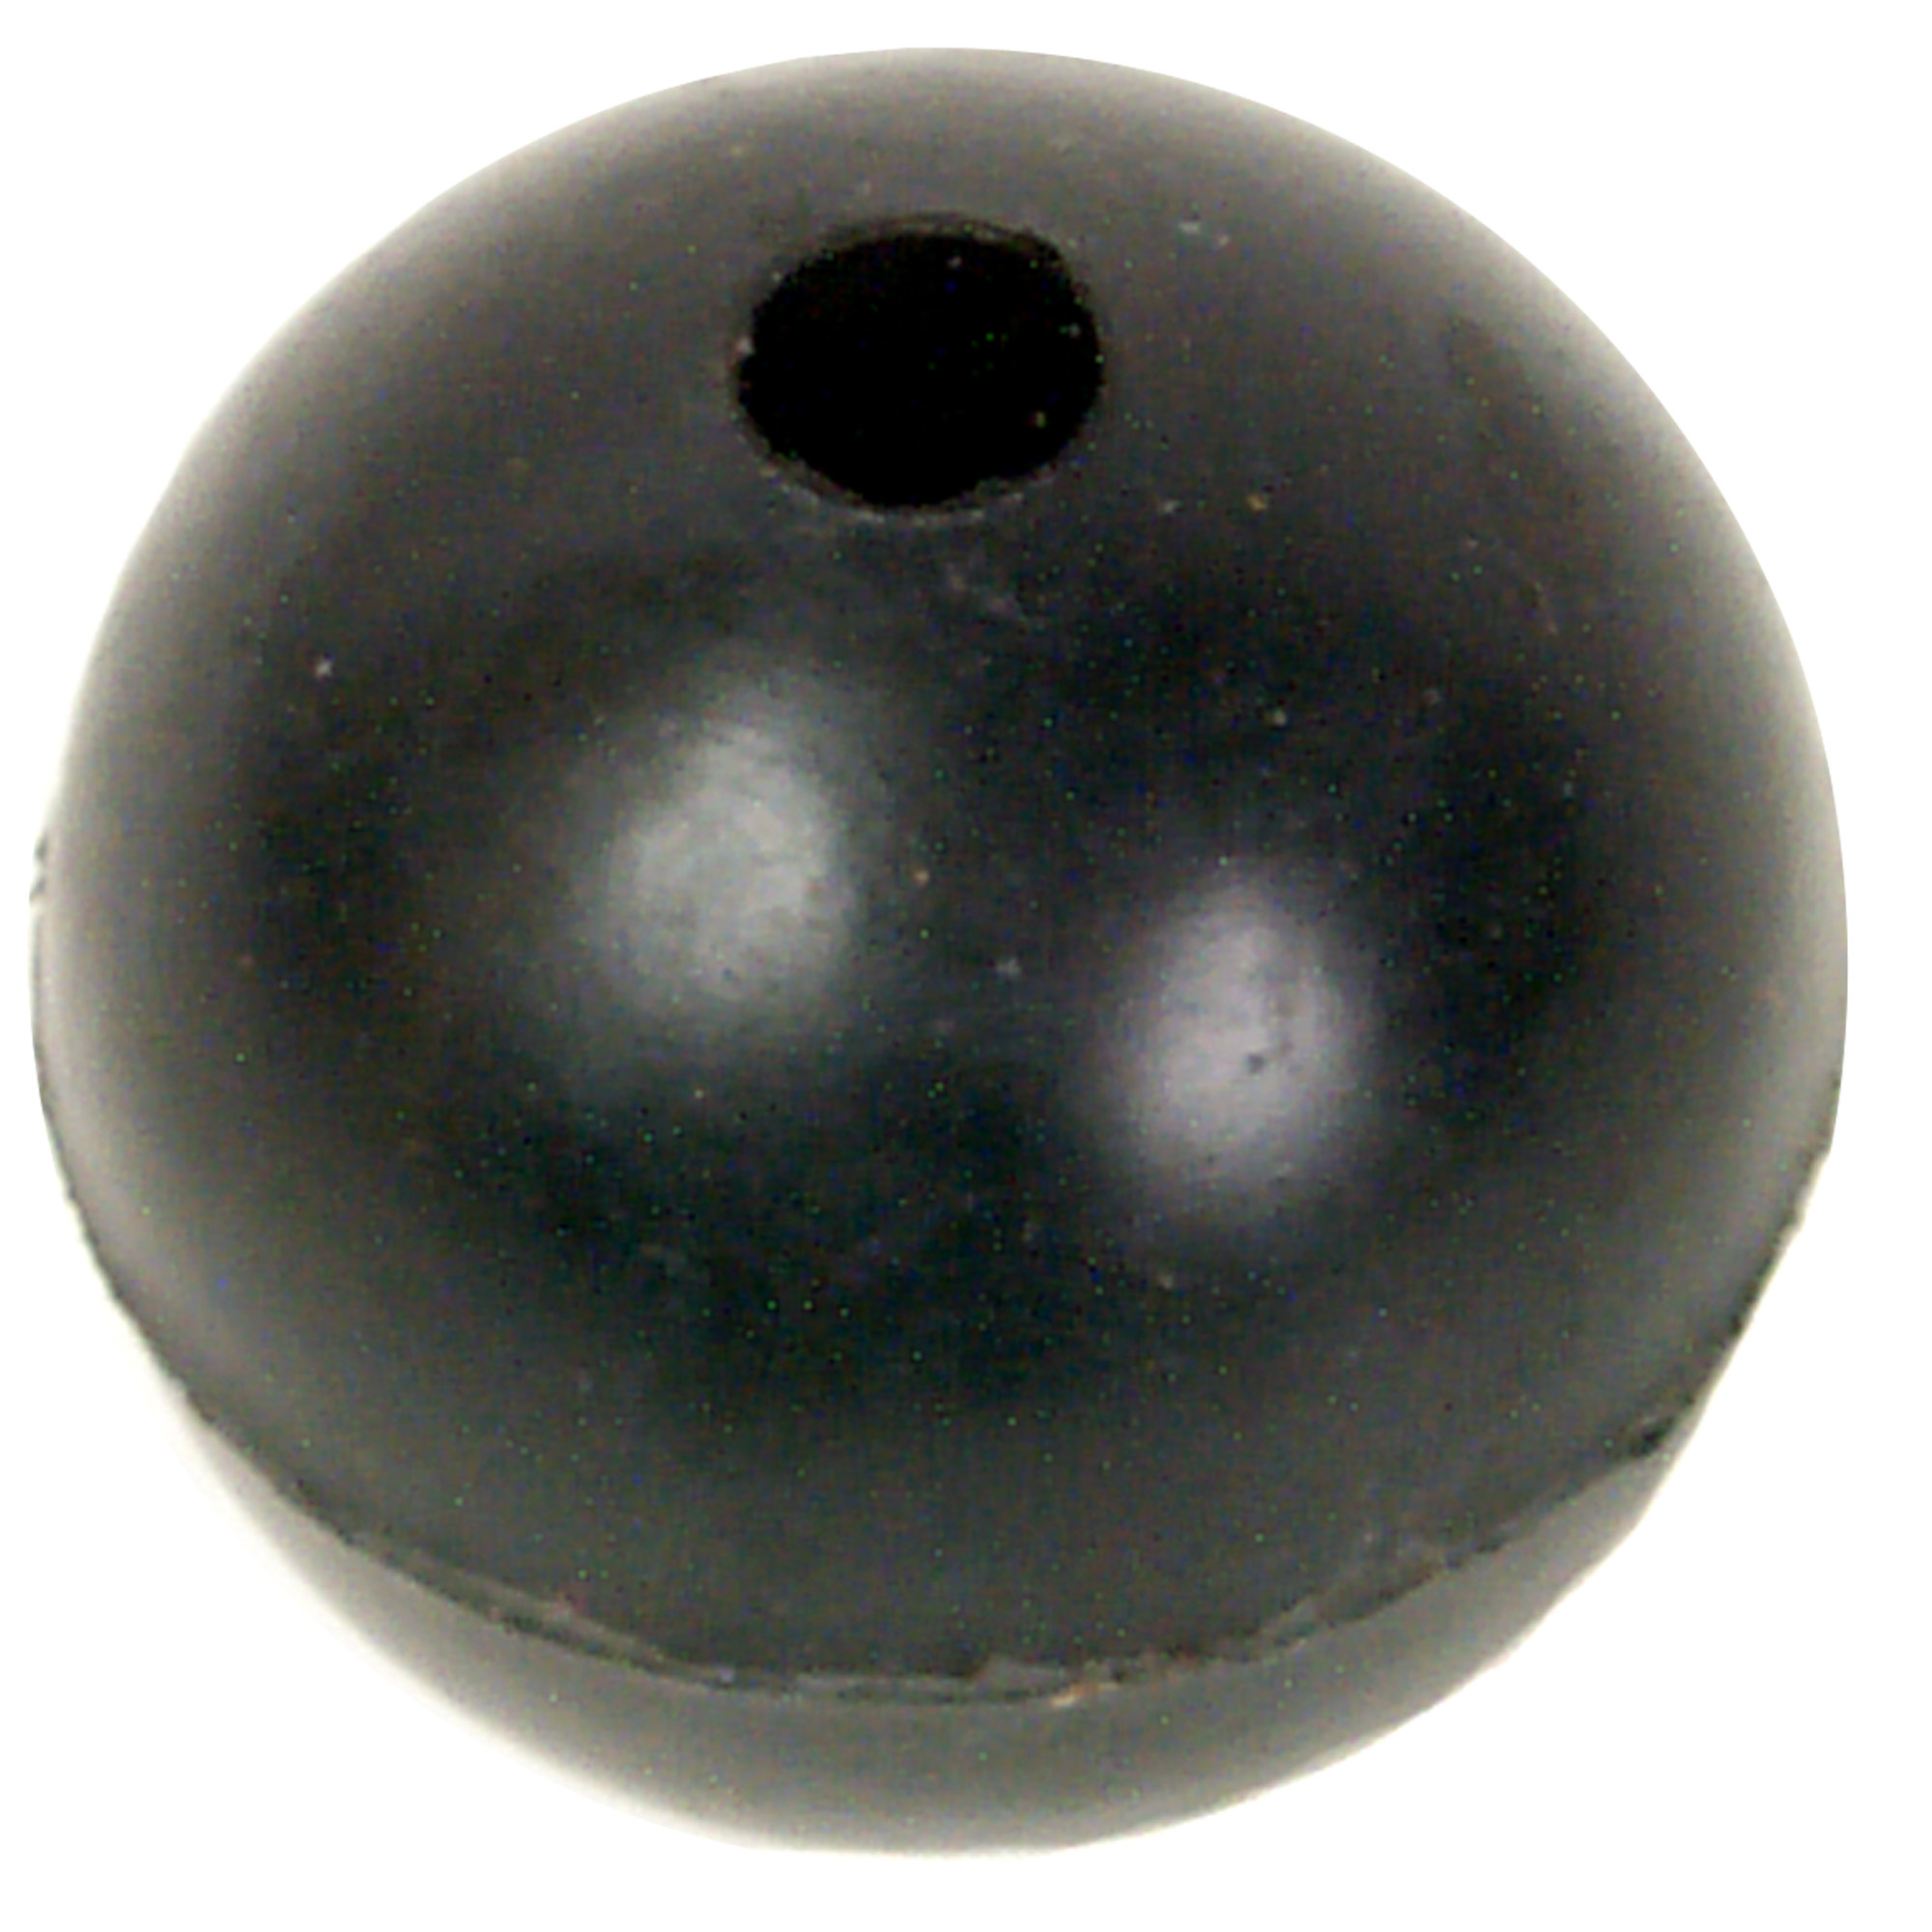 Ball Stop for Cable Assemblies, 1 1/2", Rubber